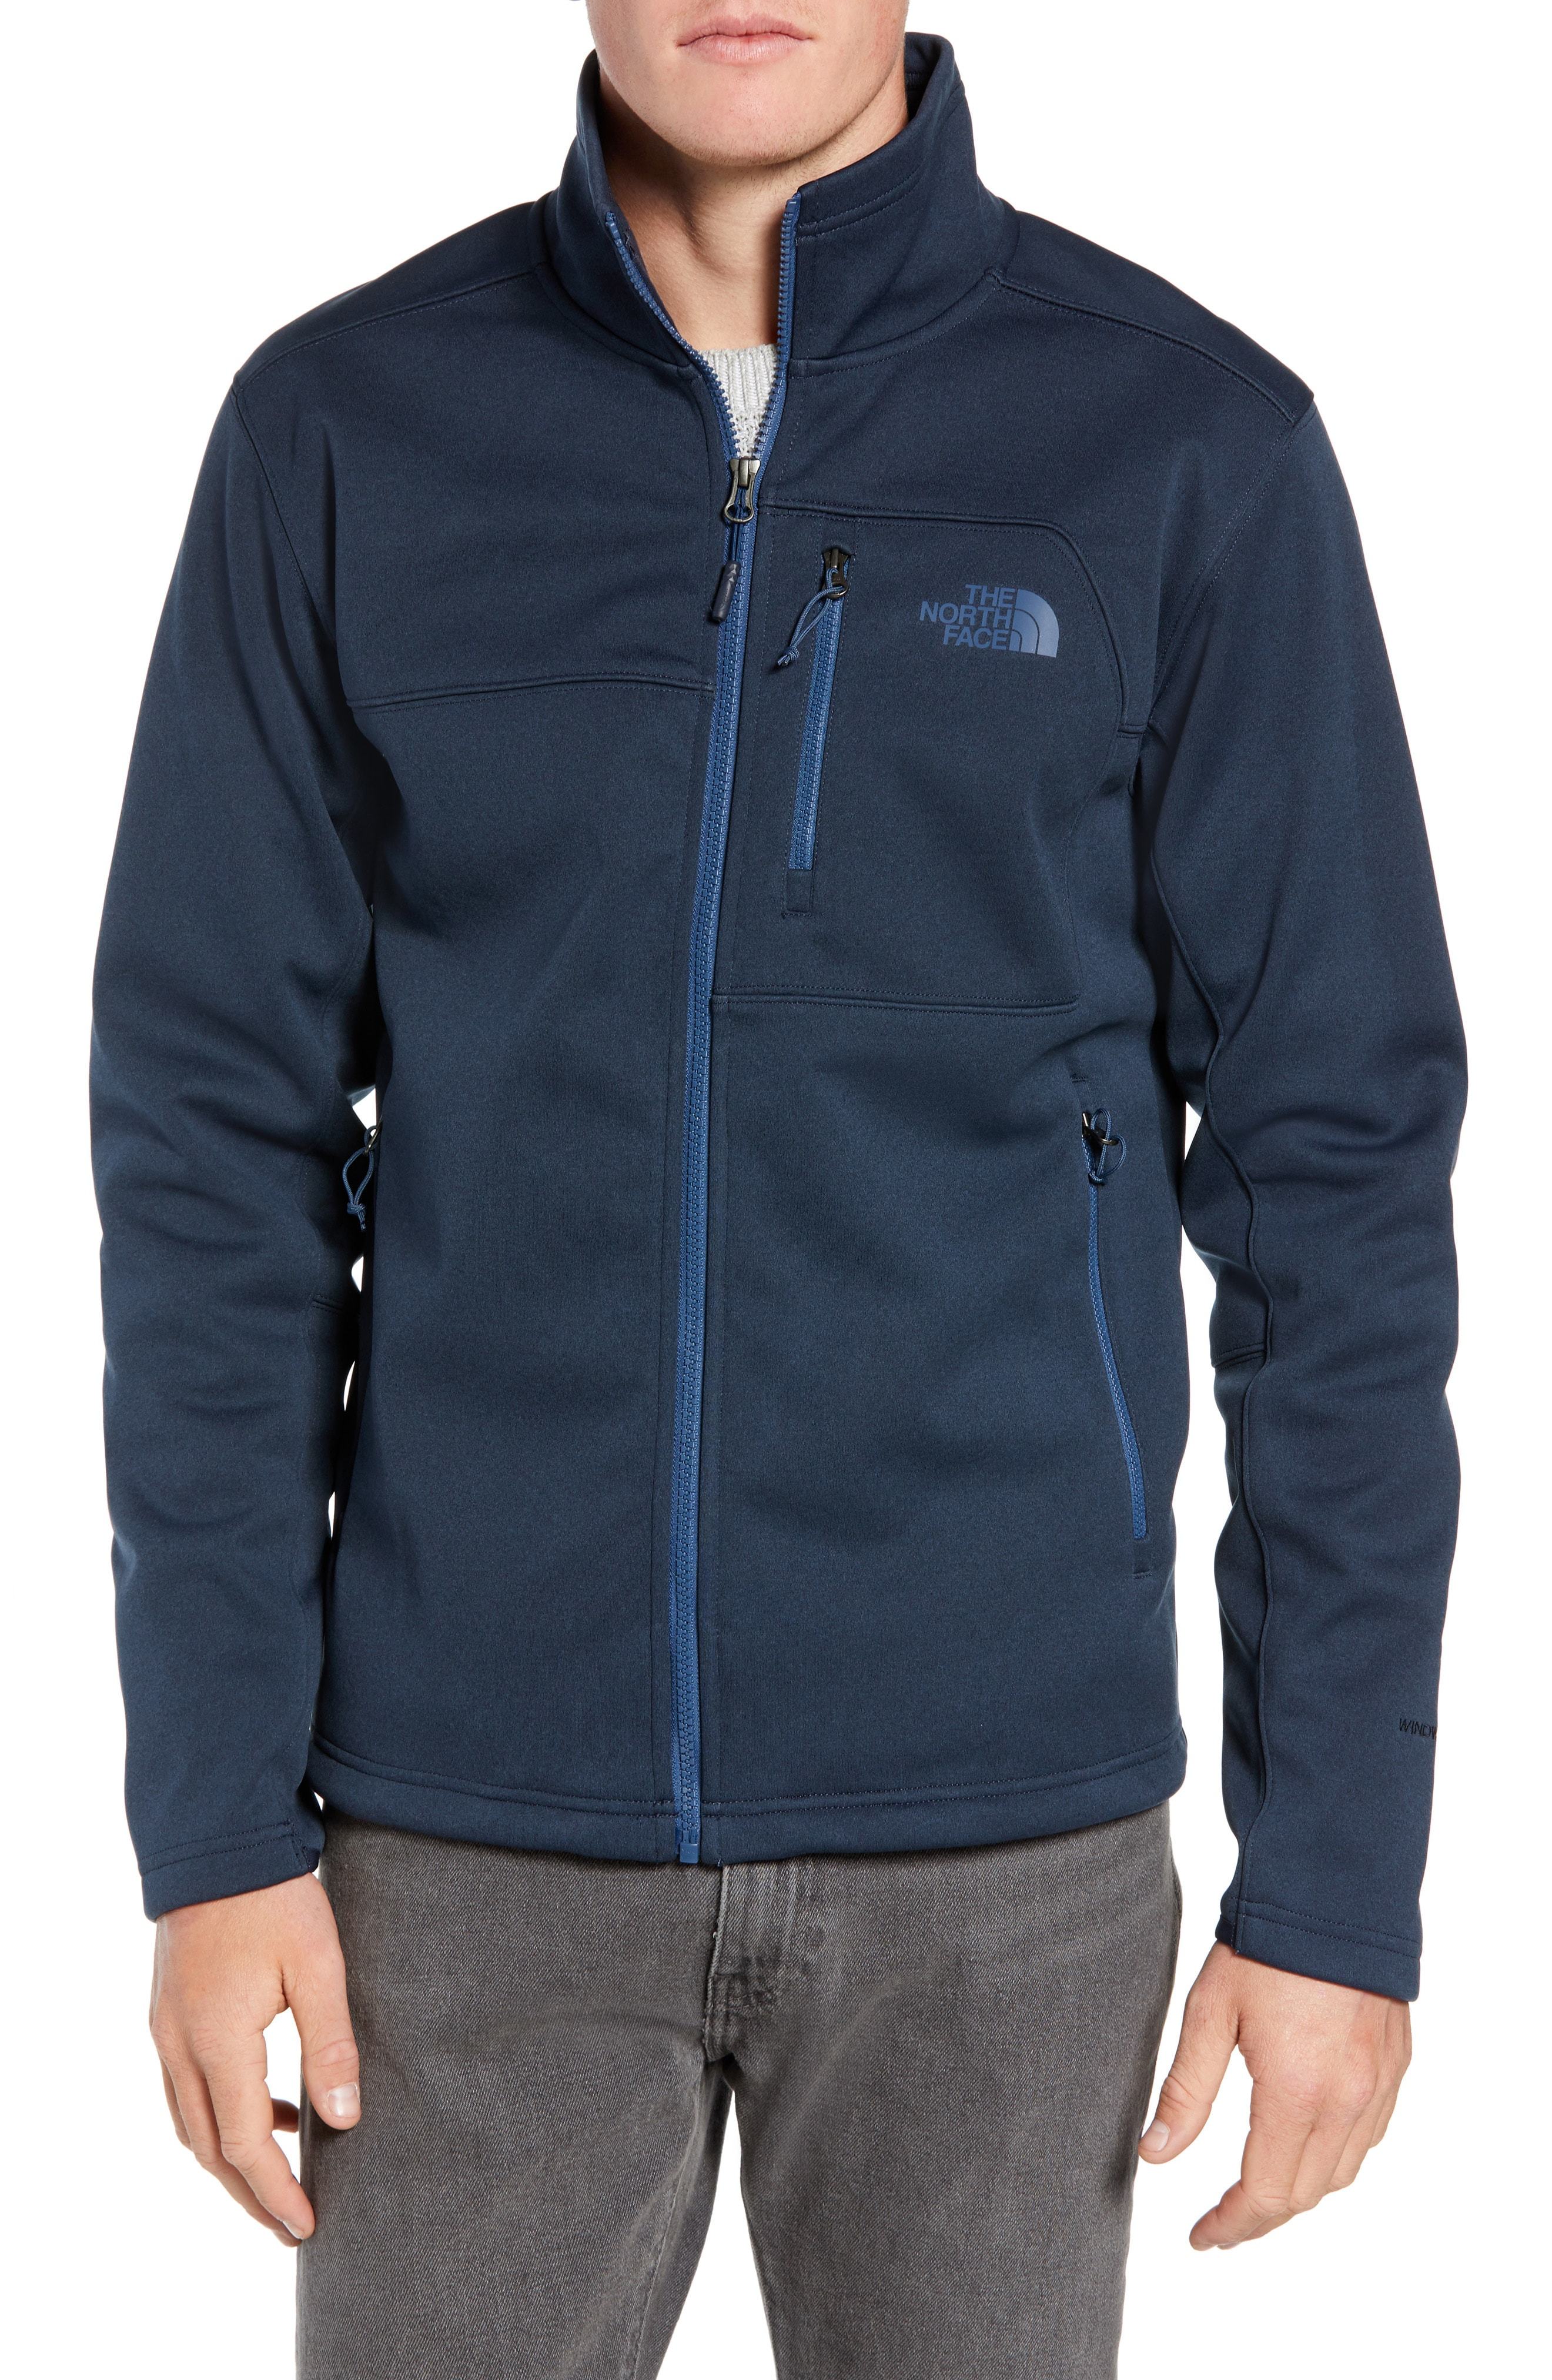 The North Face Apex Risor Jacket, $89 | Nordstrom | Lookastic